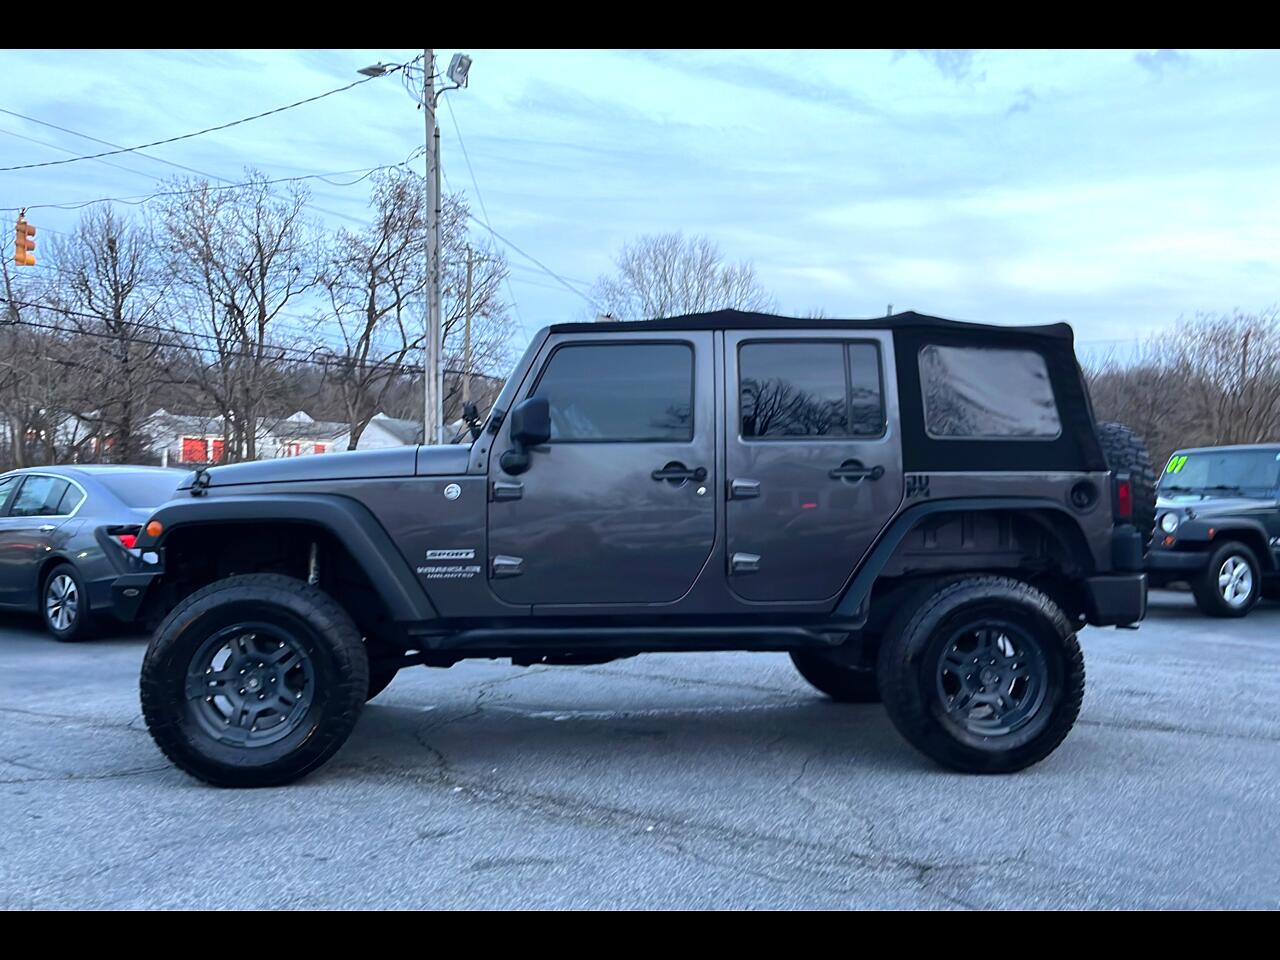 Used 2014 Jeep Wrangler Unlimited Sport 4WD for Sale in Greensboro NC 27406  Simple Auto Solutions LLC